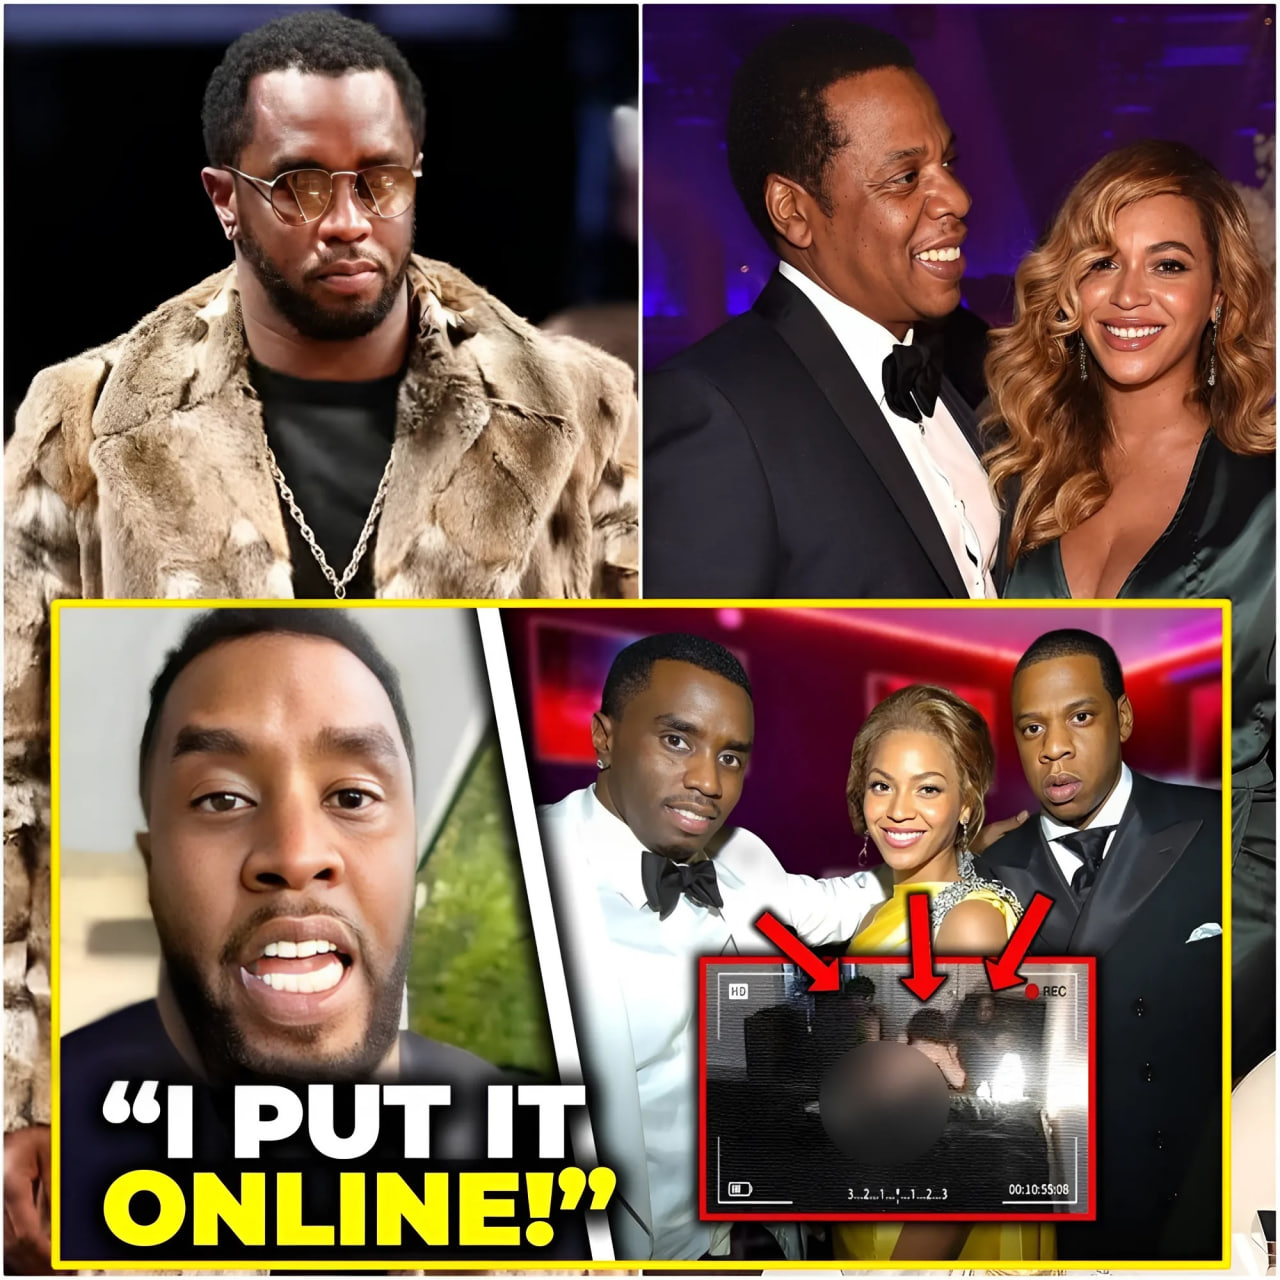 “Take that,take that” – Diddy LEAKED Secret S*X Tapes With JAY-Z & Beyonce For REVENGE!